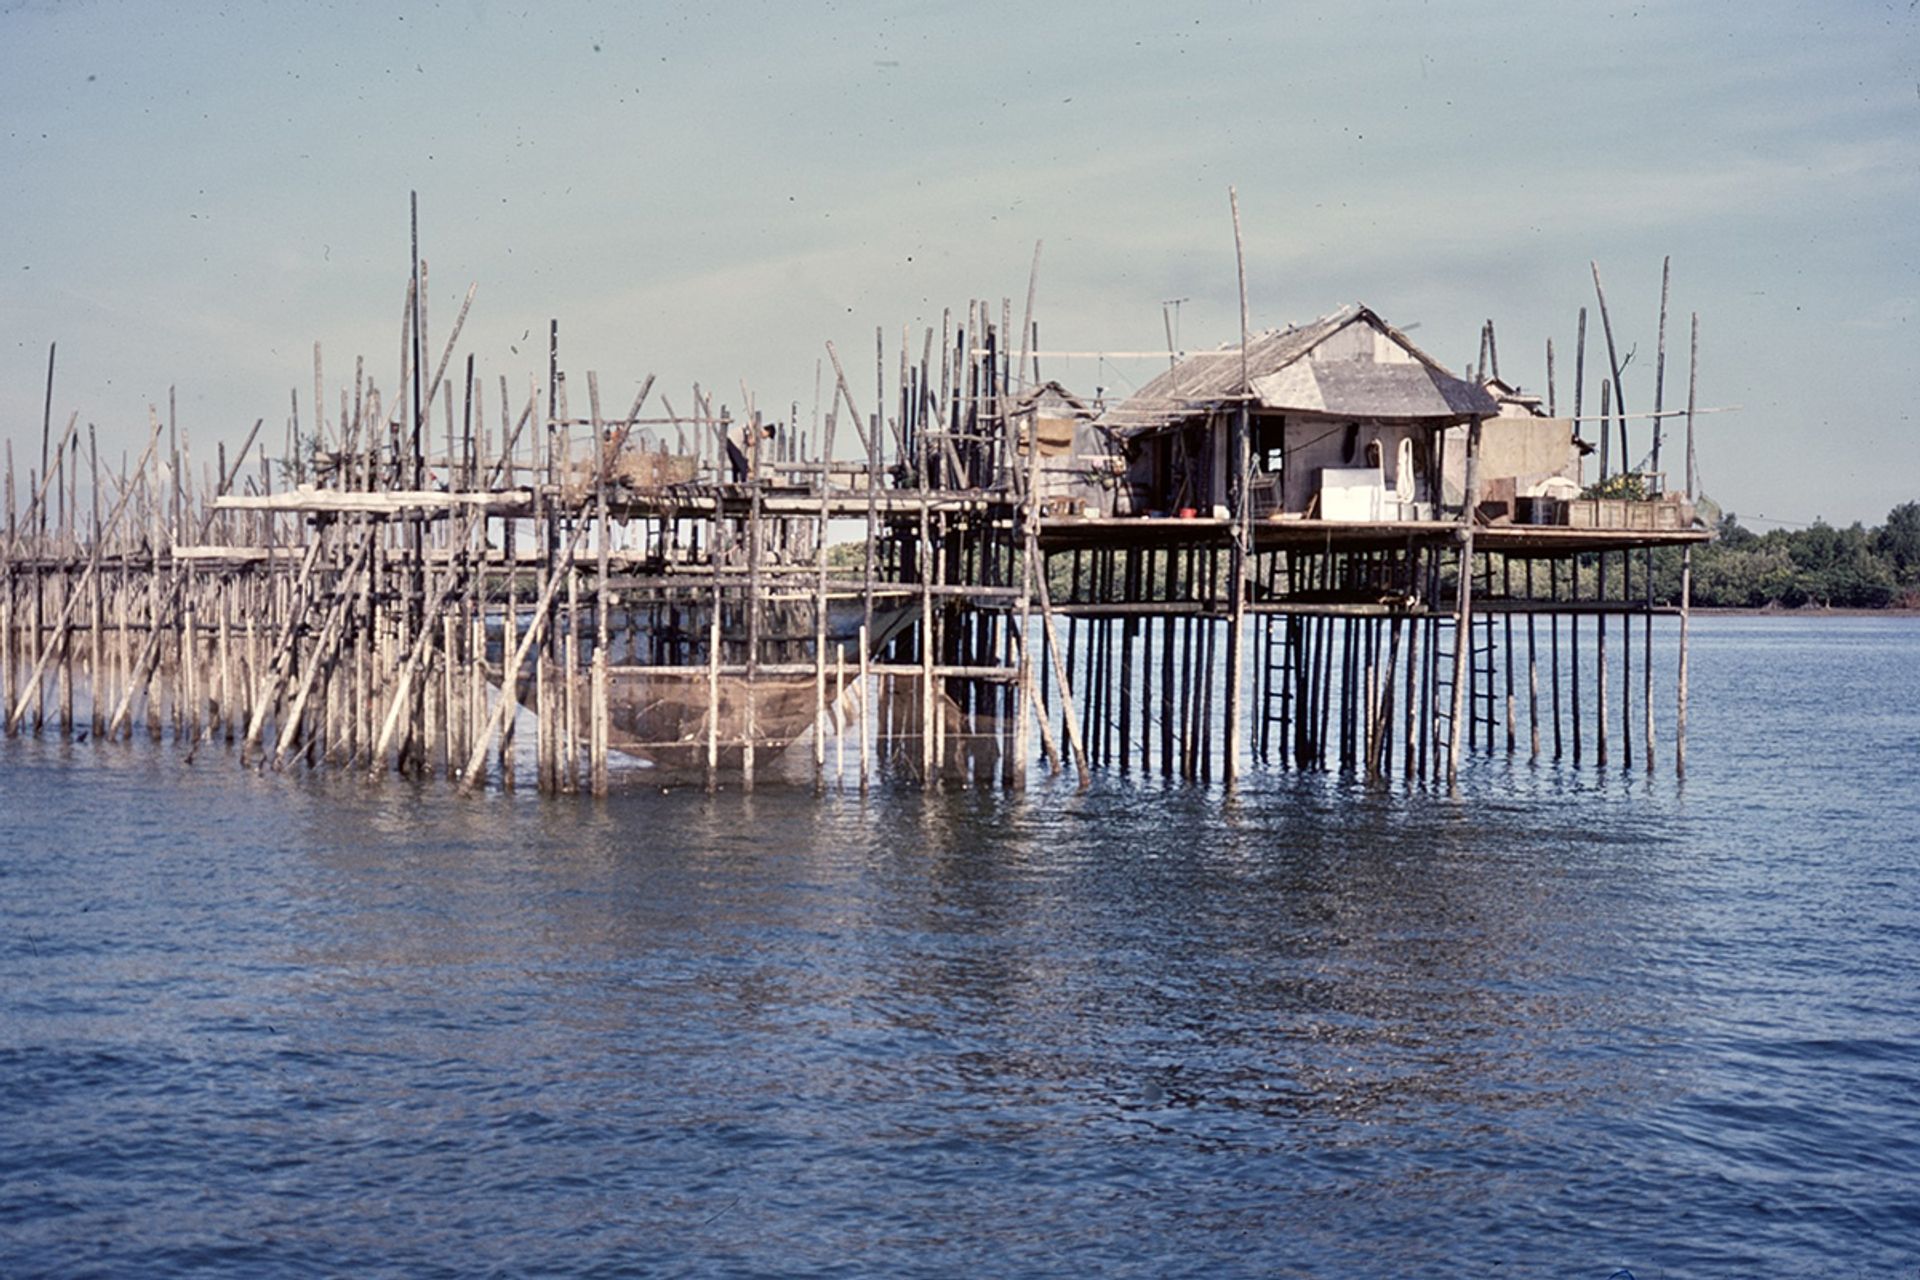 Kelongs – or offshore palisade fishtraps as the fishery experts called them – used to be a common feature of Singaporean and Malaysian waters. Photographed in the late 1960s.